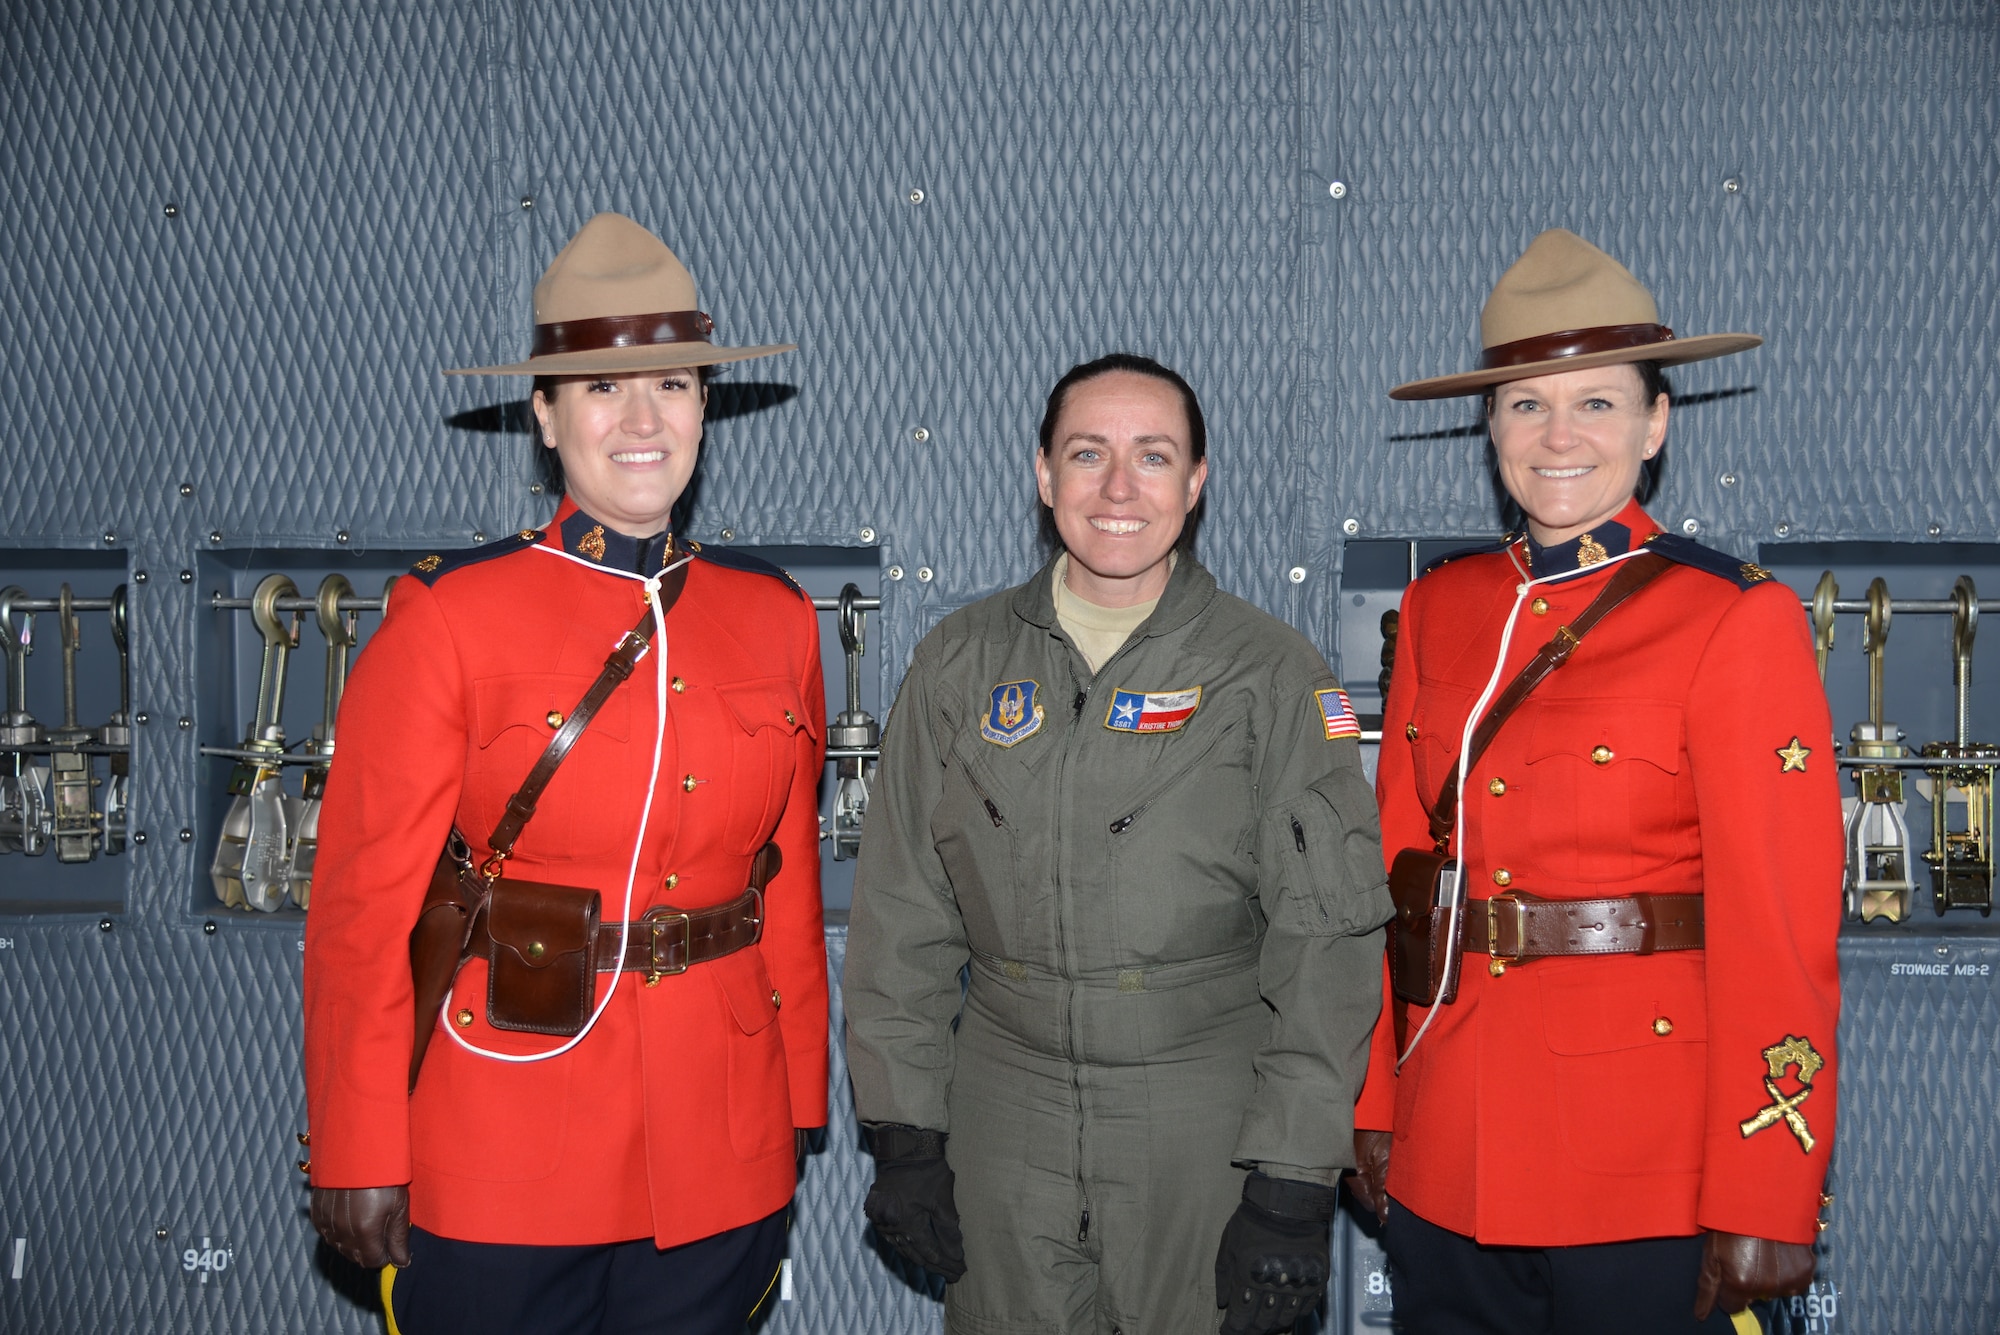 Royal Canadian Mounted Police, Courtney Twolan and Lorelei Jeffrey pose with Staff Sgt. Kristine Thomas, loadmaster and affiliation Instructor, 433rd Contingency Response Flight loadmaster, and affiliation Instructor with the Joint Base San Antonio-Lackland, Texas during a tour of the C-5M Super Galaxy aircraft at the Abbotsford International Airport in Abbotsford British Columbia, Canada. The airport celebrates a week of International Women’s Day, March 10-11, 2018, during the “Sky’s the limit-Girls fly too” Airshow. The RCMP provides law enforcement at the federal level. It also provides policing on a contract basis to the three territories (Northwest Territories, Nunavut, and Yukon), and eight of Canada's provinces. (U.S. Air Force photo by Ms. Minnie Jones)